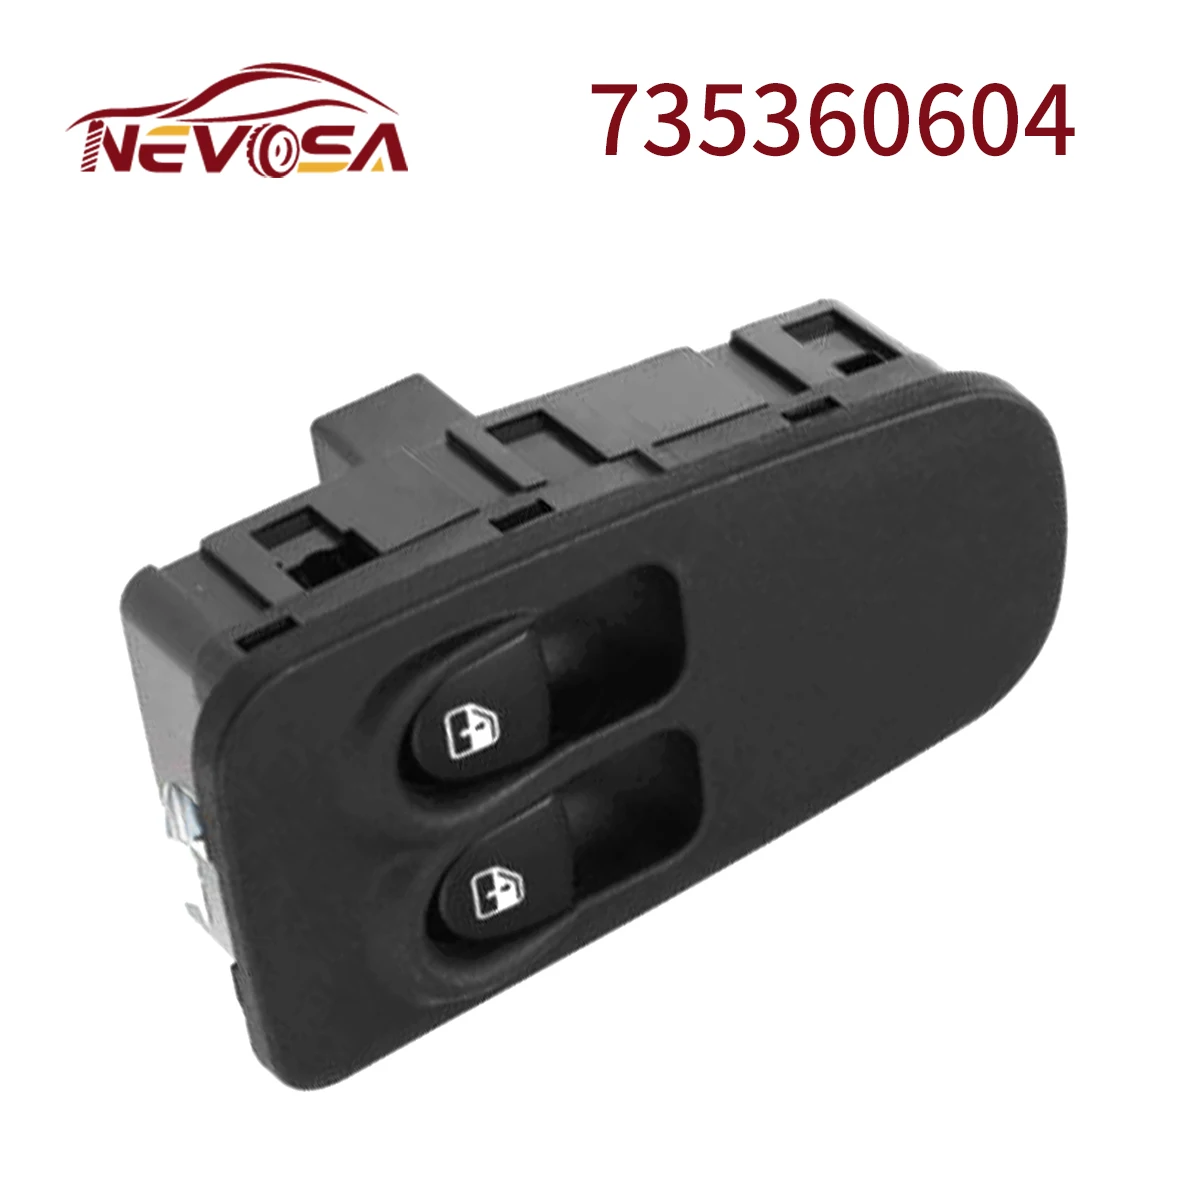 

For Fiat Lancia Ypsilon 2003-2011 735360604 New Front Left Power Window Control Switch Button 735346366 10 Pins Parts